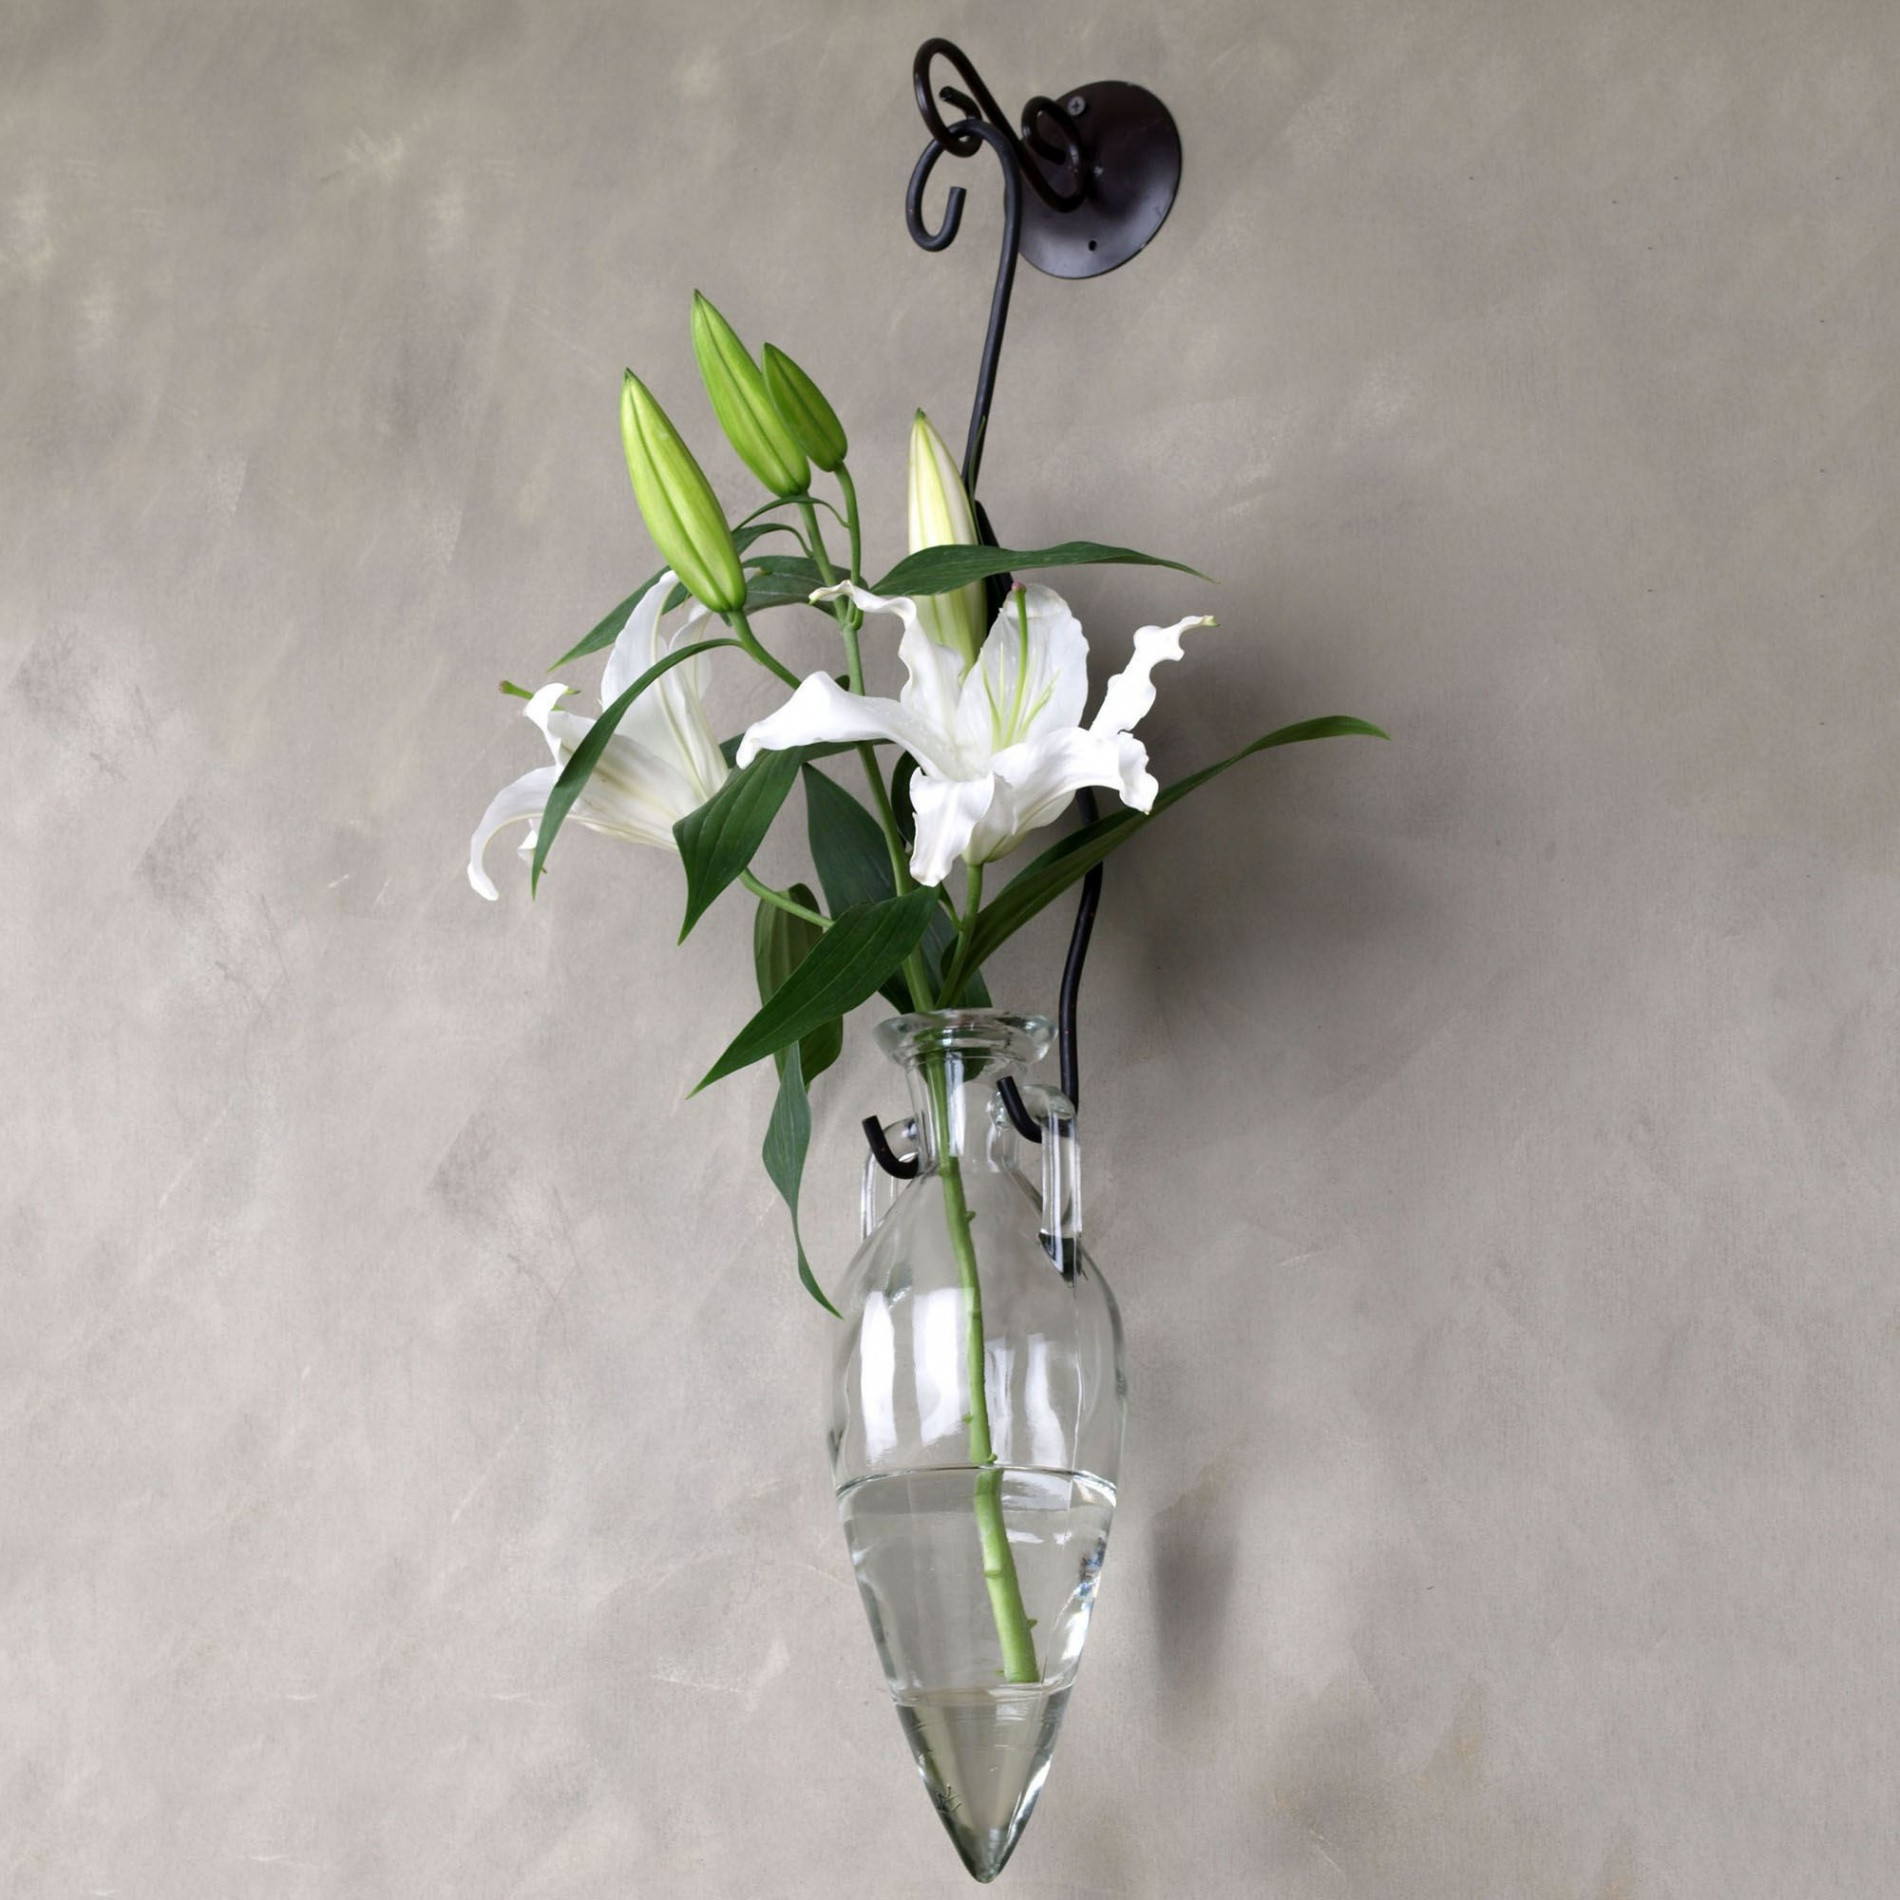 15 Stylish Clear Plastic Vases for Centerpieces 2024 free download clear plastic vases for centerpieces of h vases wall hanging flower vase newspaper i 0d scheme wall scheme with regard to h vases wall hanging flower vase newspaper i 0d scheme wall scheme v